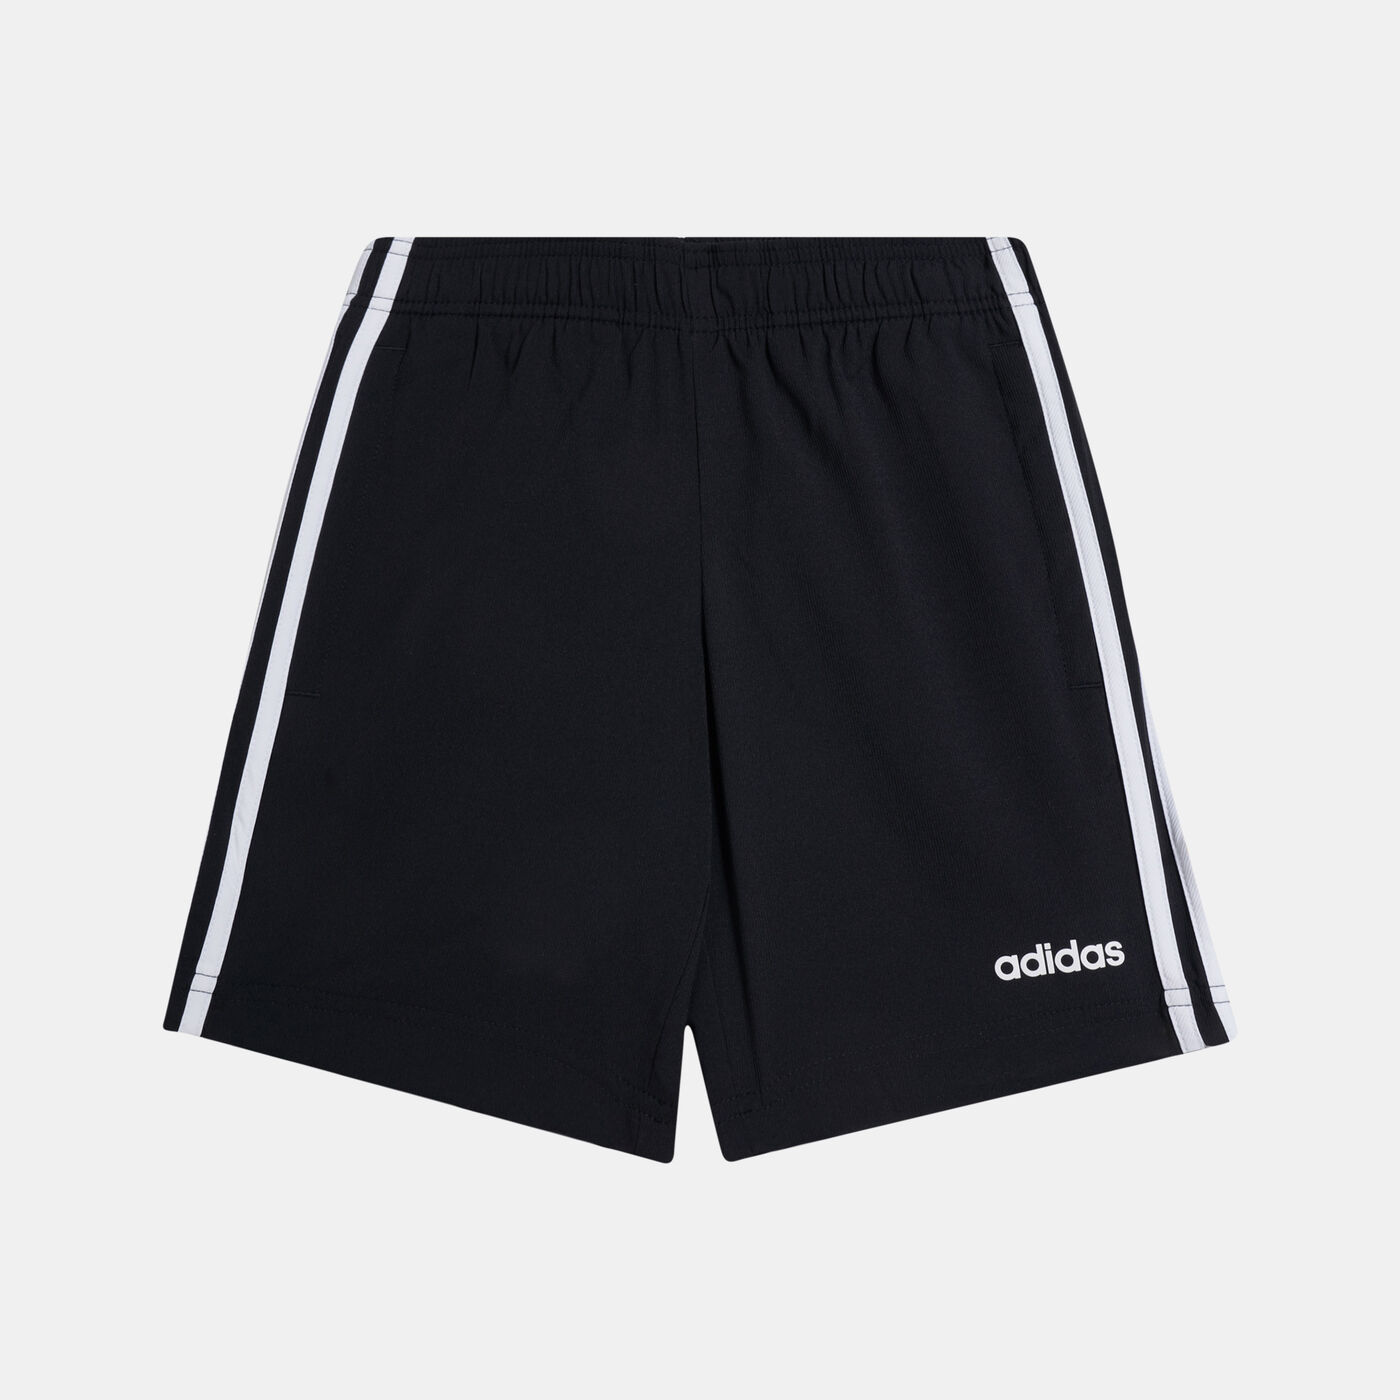 Kids' Essentials 3-Stripes Woven Shorts (Younger Kids)